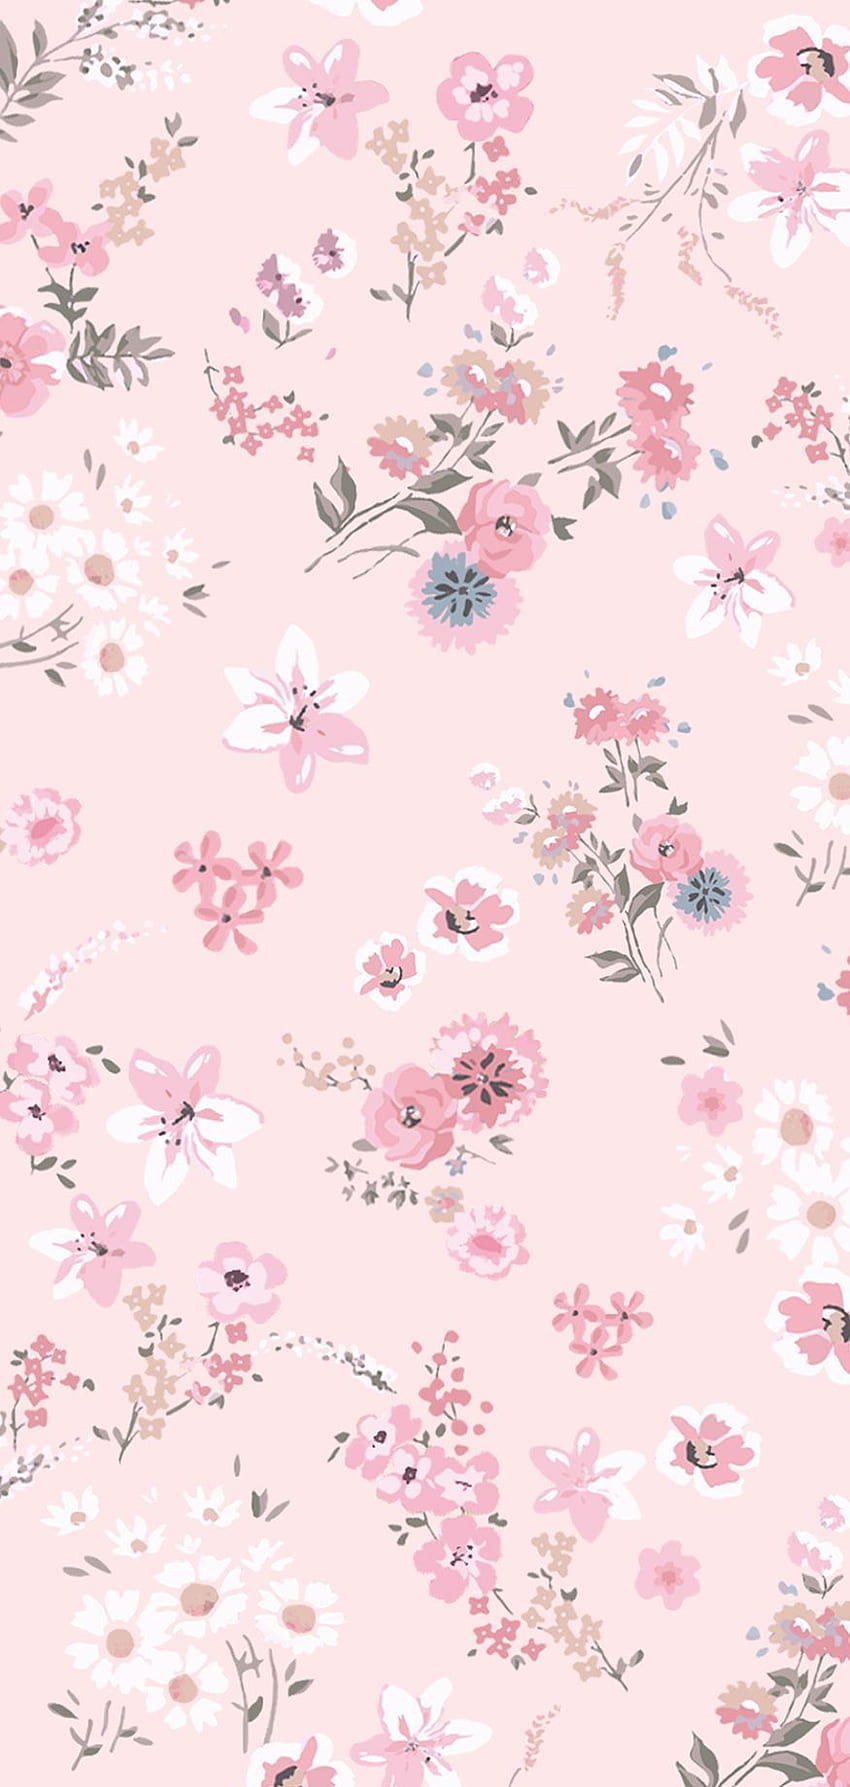 Anime Fabric, Wallpaper and Home Decor | Spoonflower